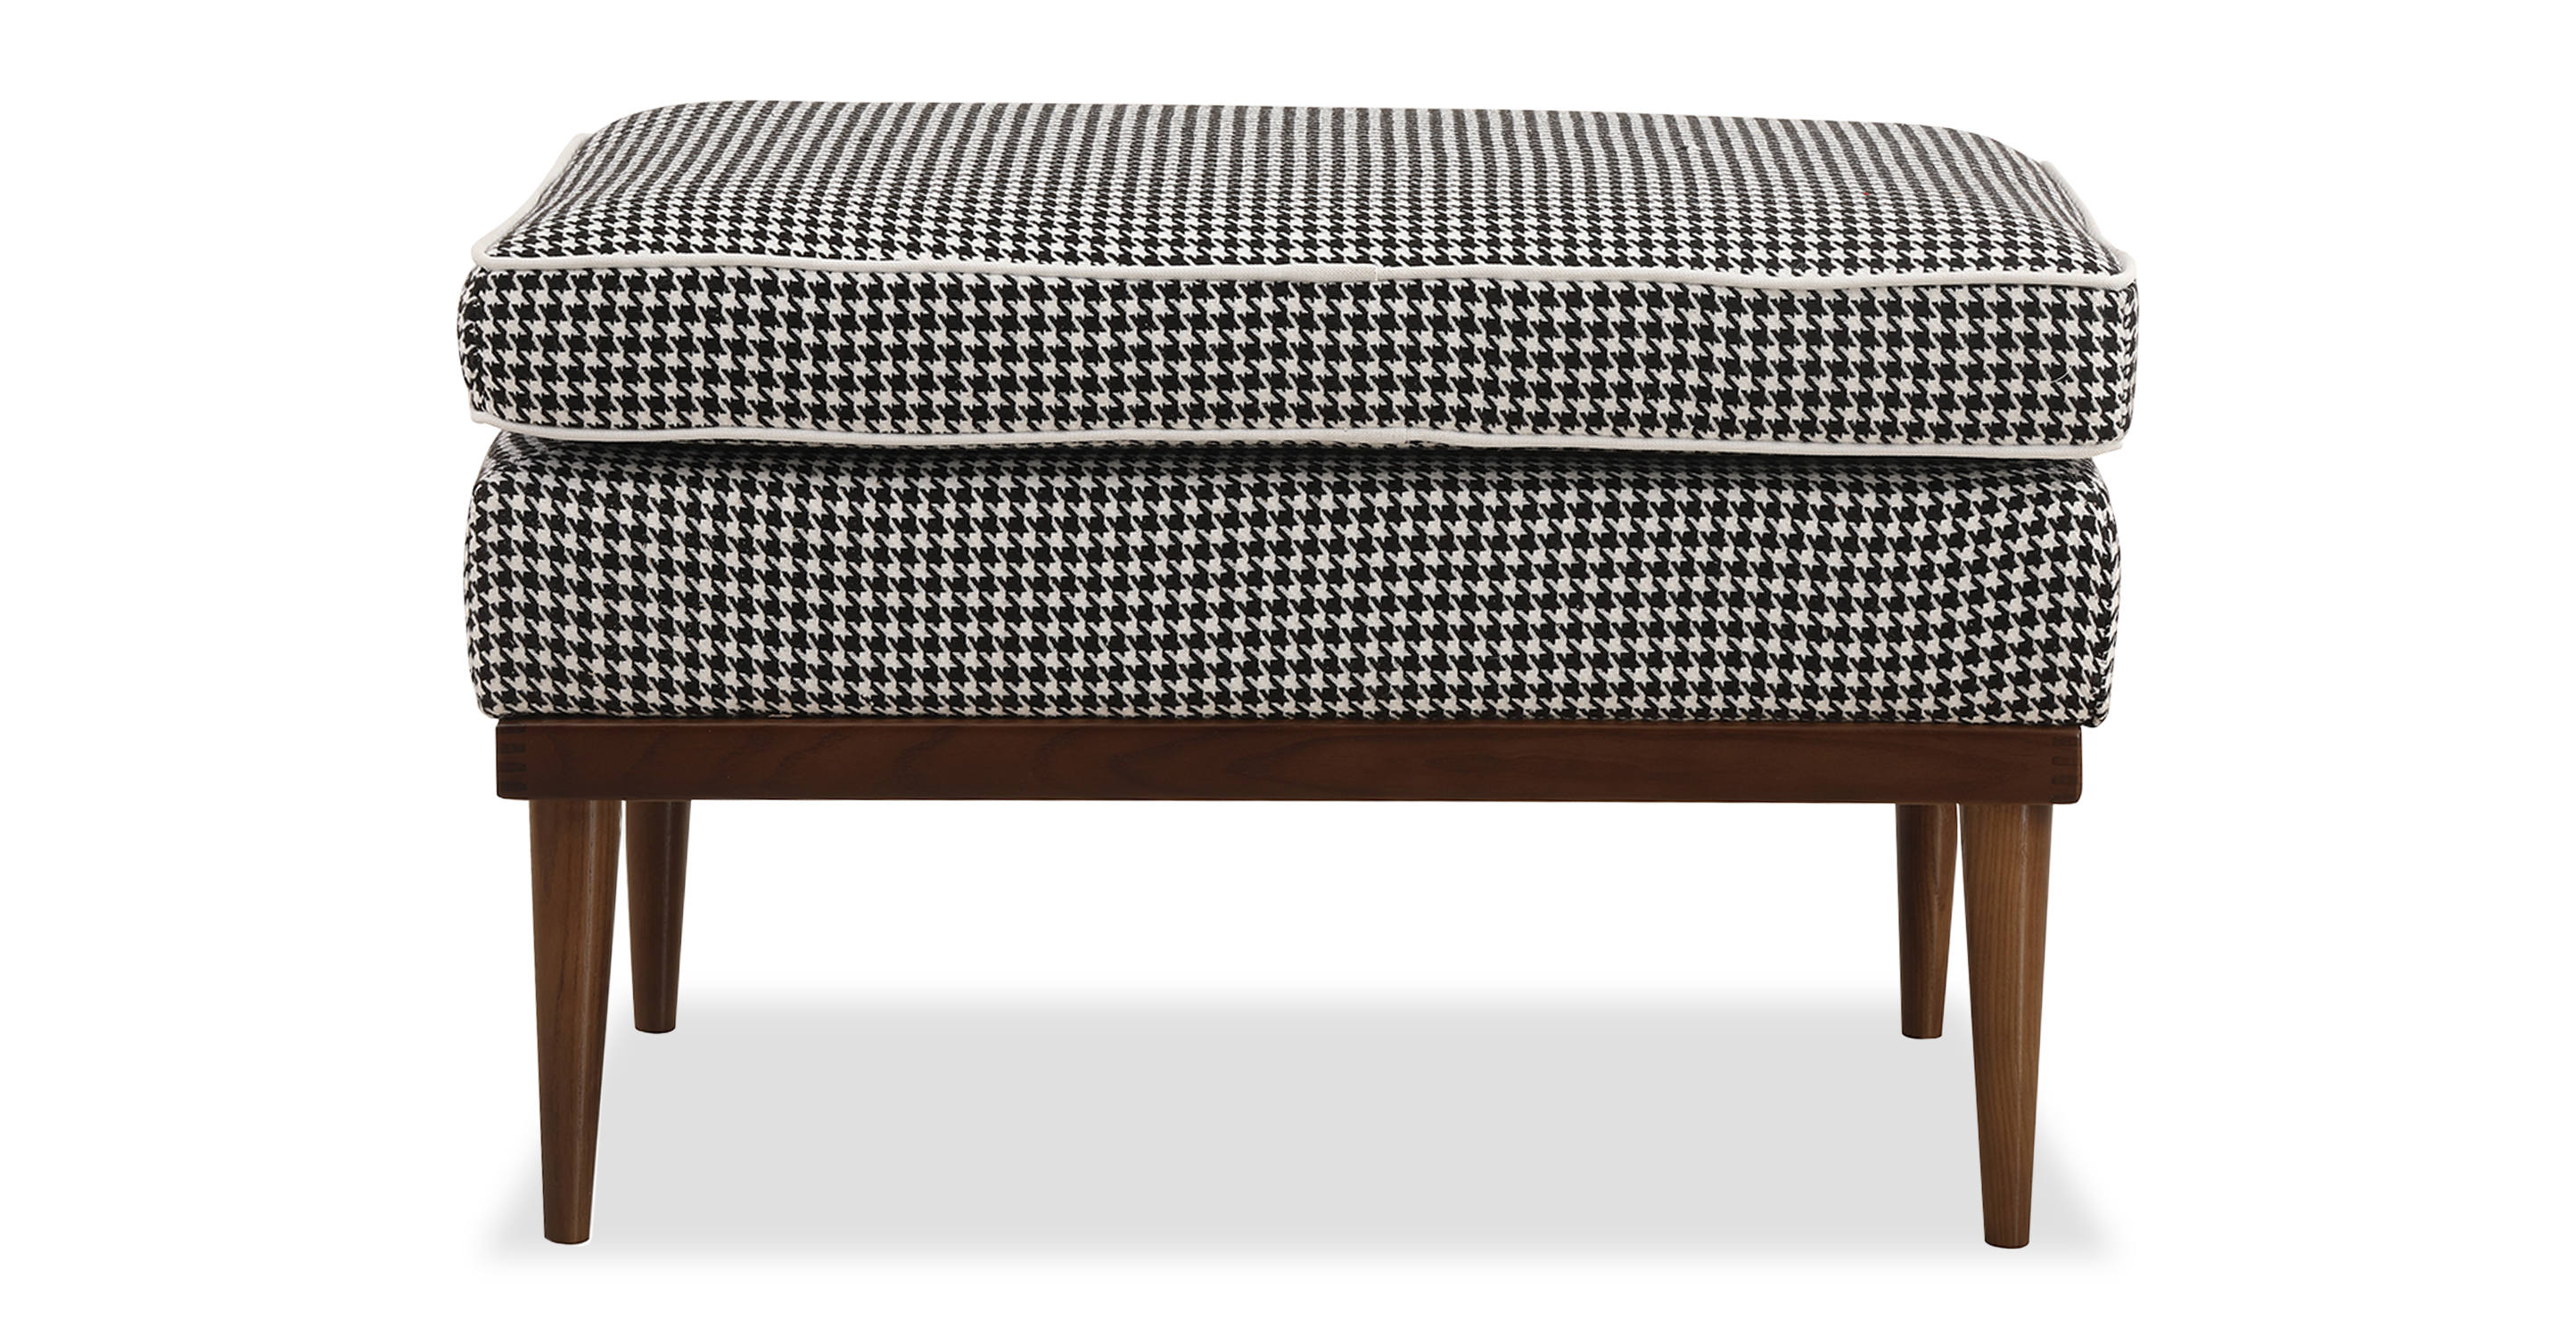 Elektra Houndstooth rectangle ottoman with exposed walnut frame and legs. Black and white houndstooth pattern is present on the base and top ottoman cushion. Style is modern and sophisticated. 